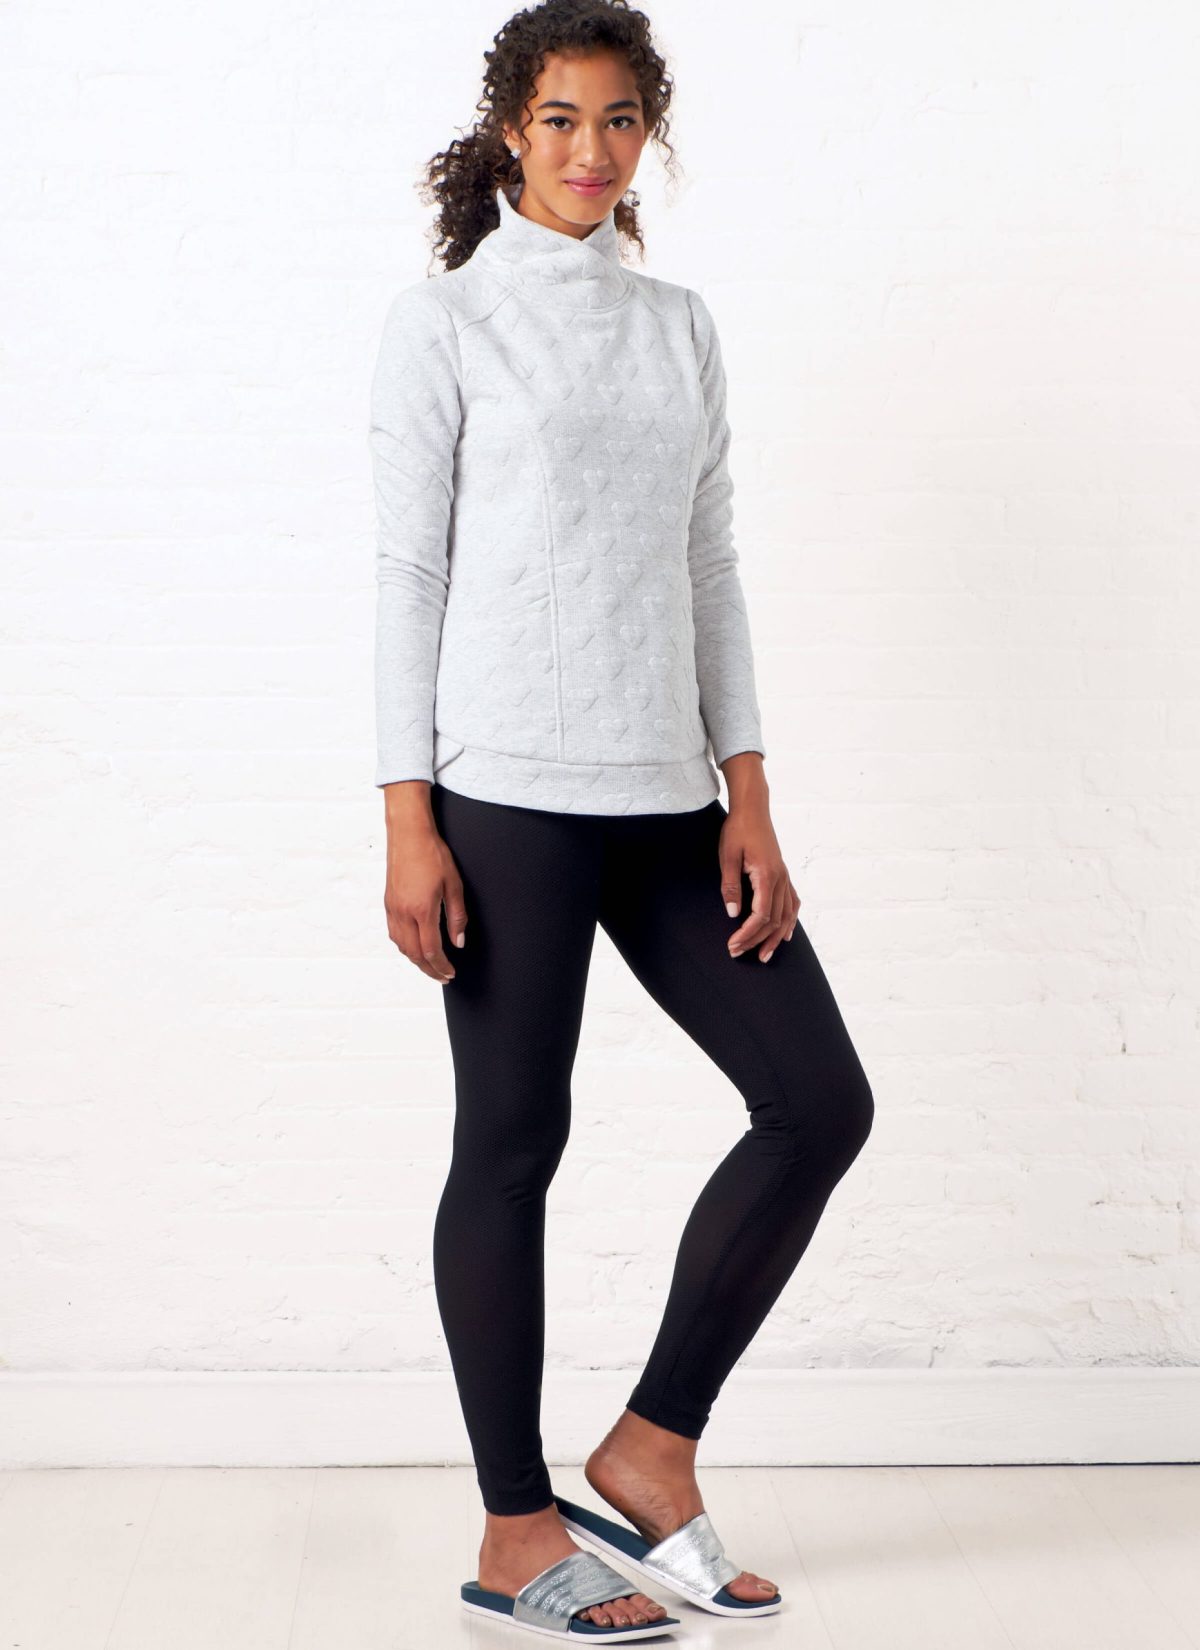 McCall's Sewing Pattern M7874 Misses' Tops and Leggings